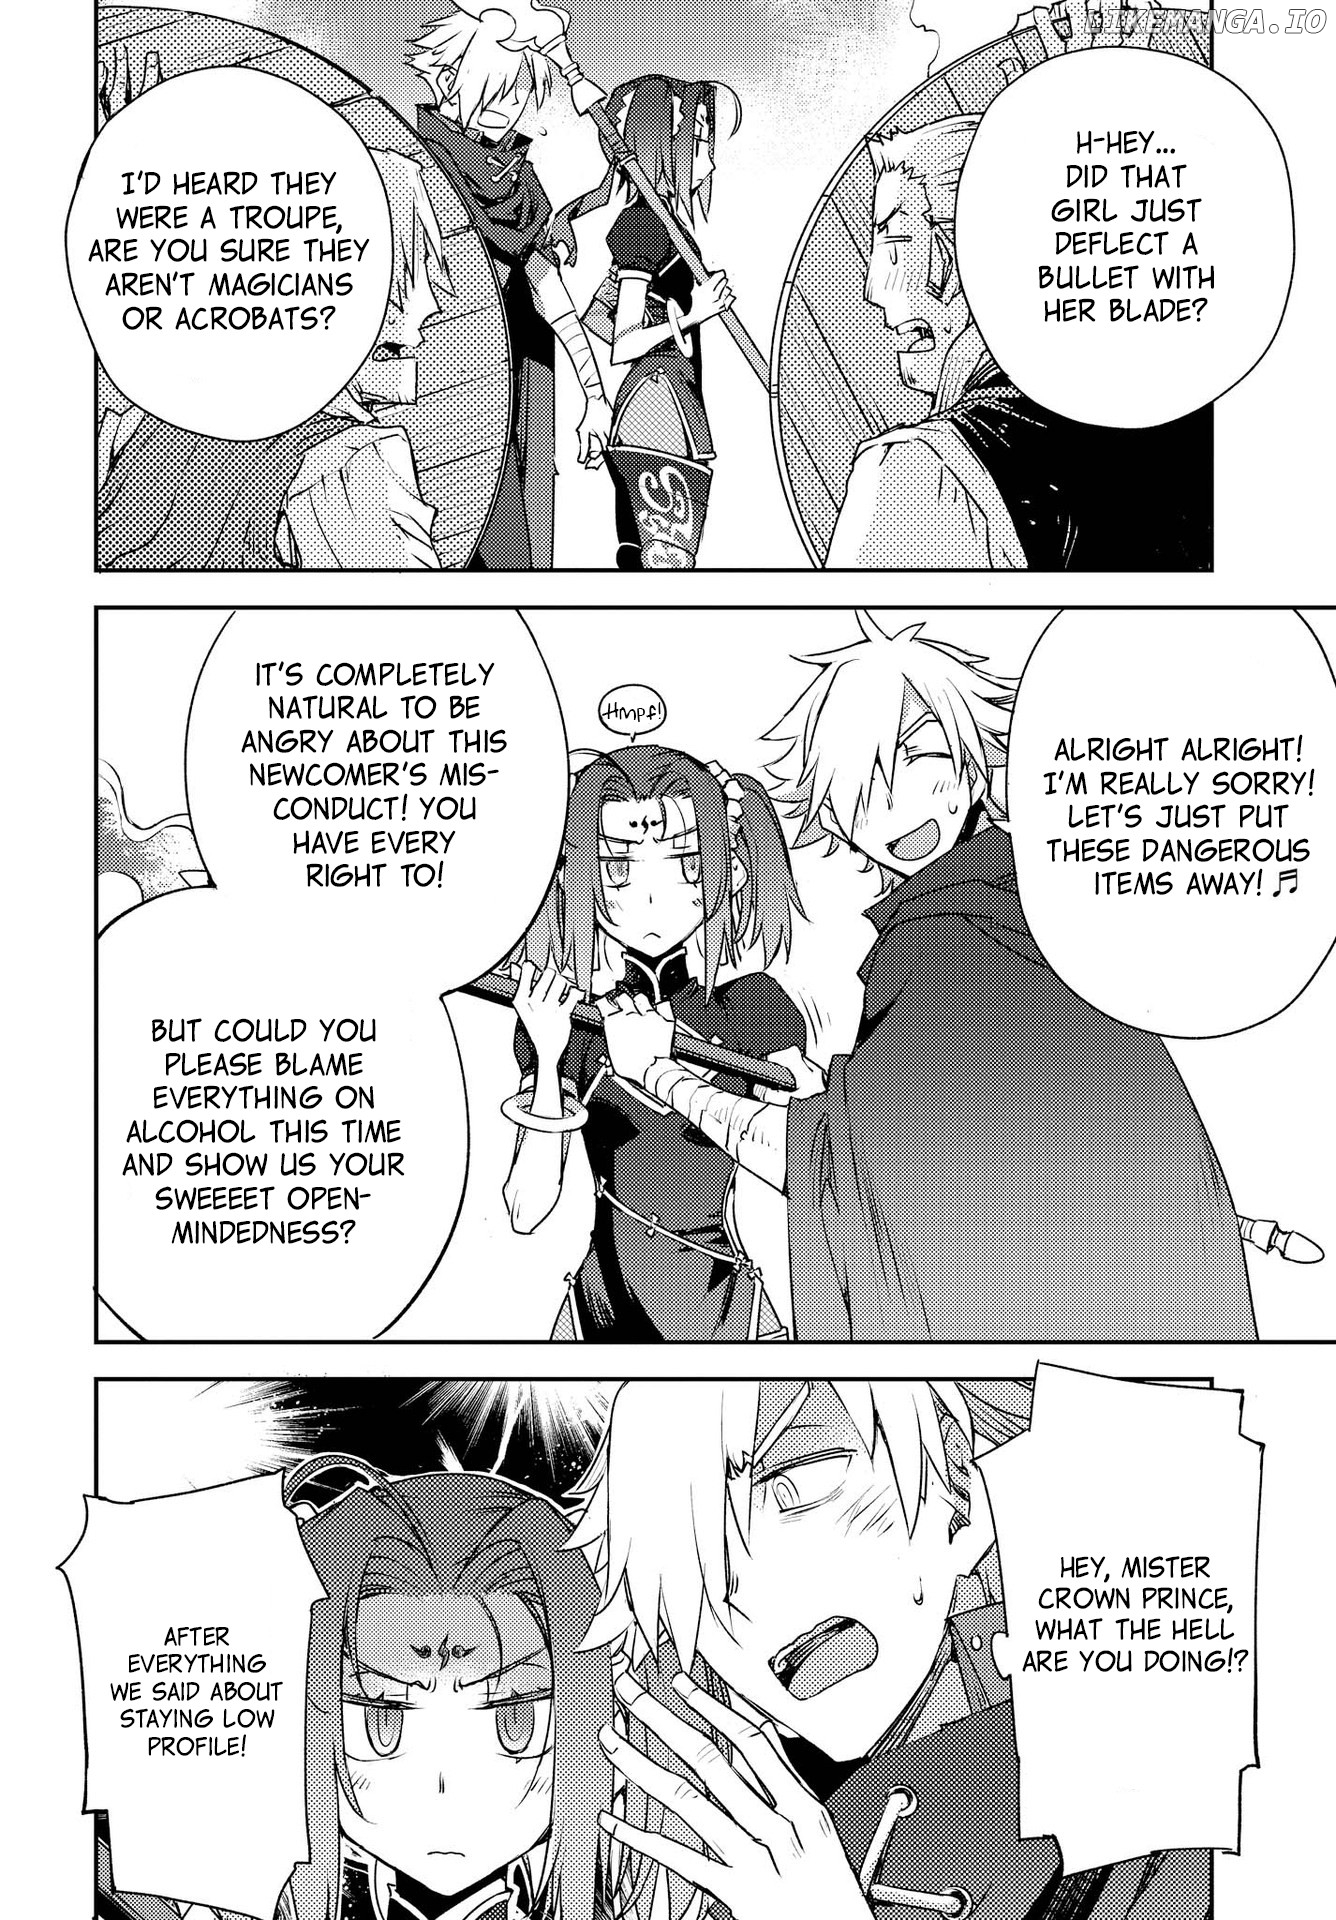 Fate/Grand Order: Epic of Remnant - Subspecies Singularity IV: Taboo Advent Salem: Salem of Heresy chapter 5 - page 22